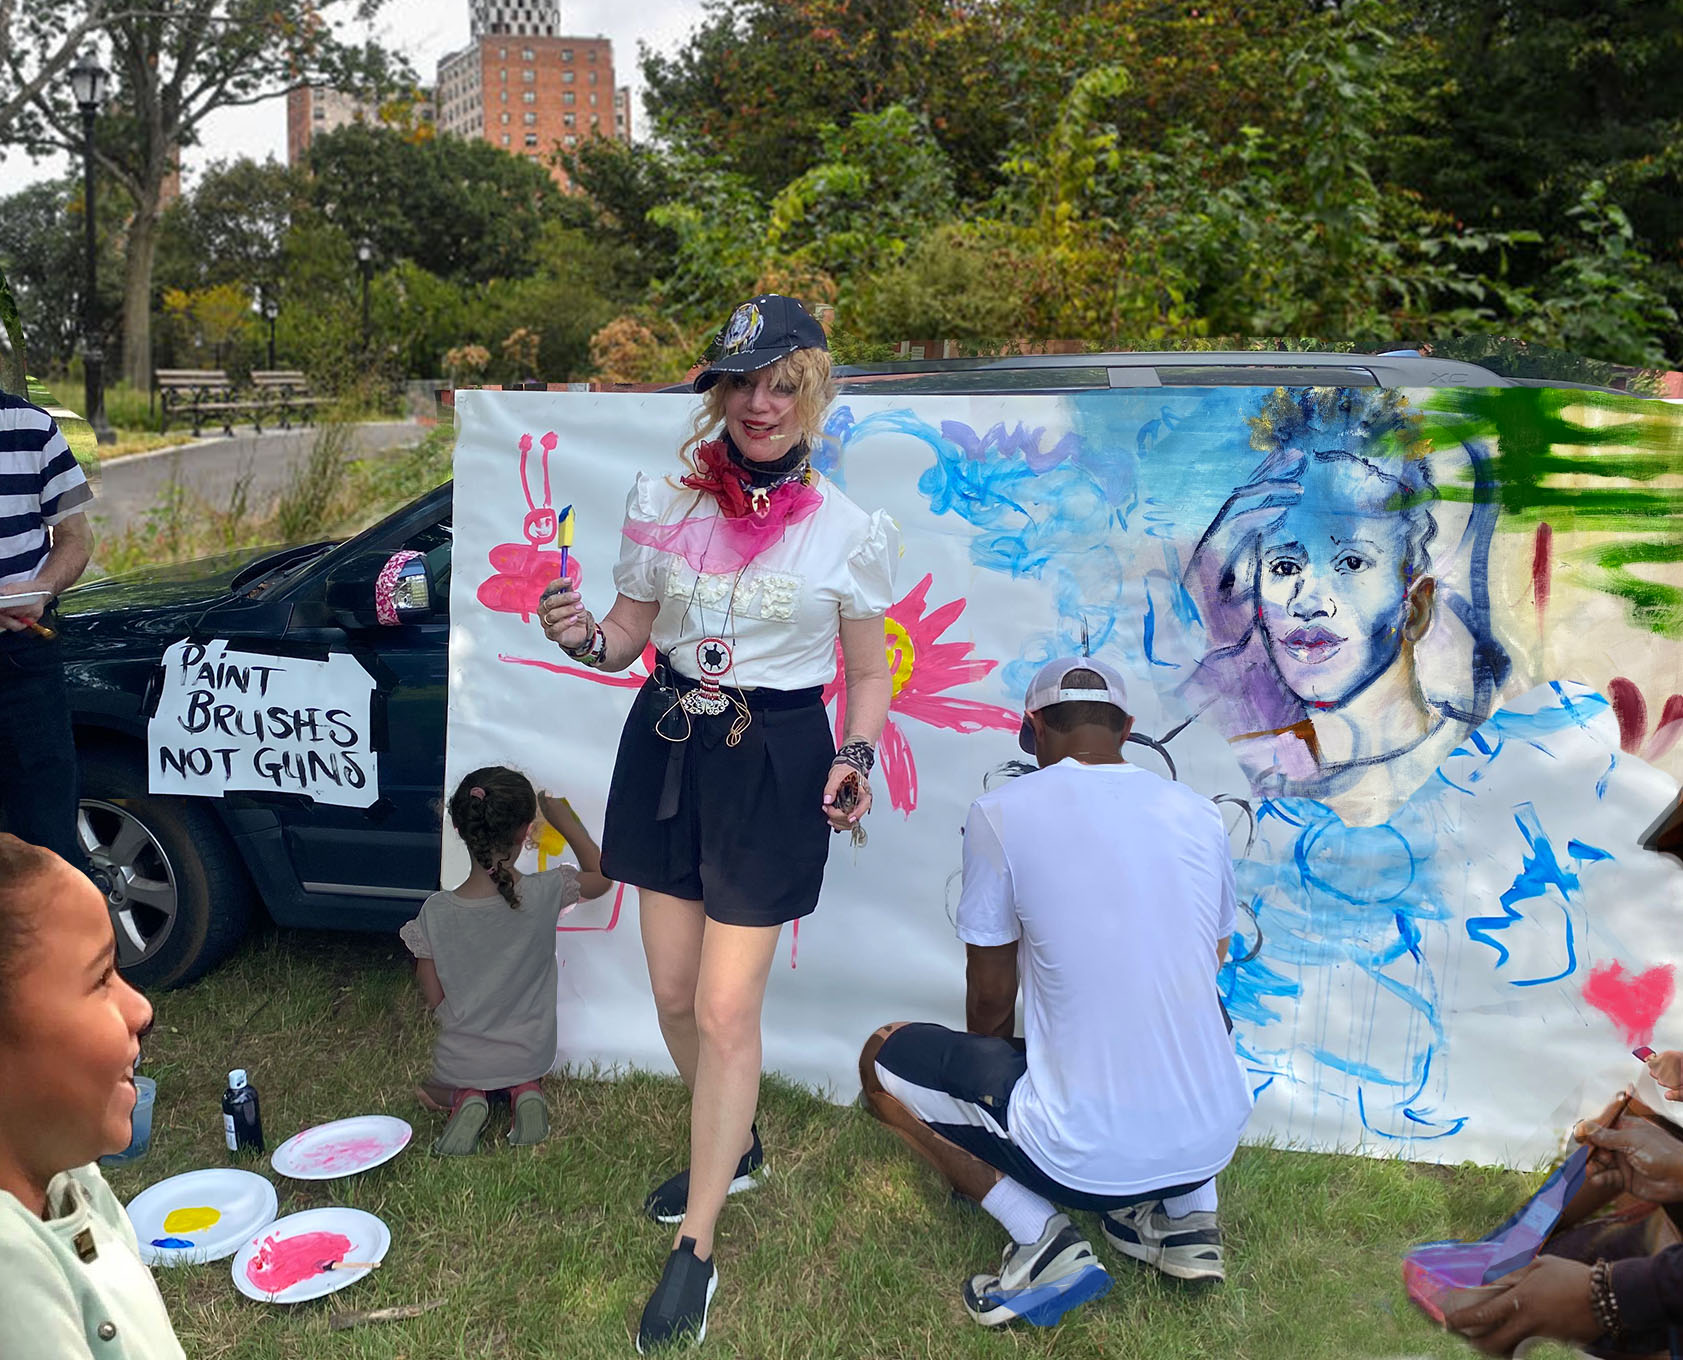  WE POP UP with FREE COLOR! ART1 MUSIC! in  PARKS!